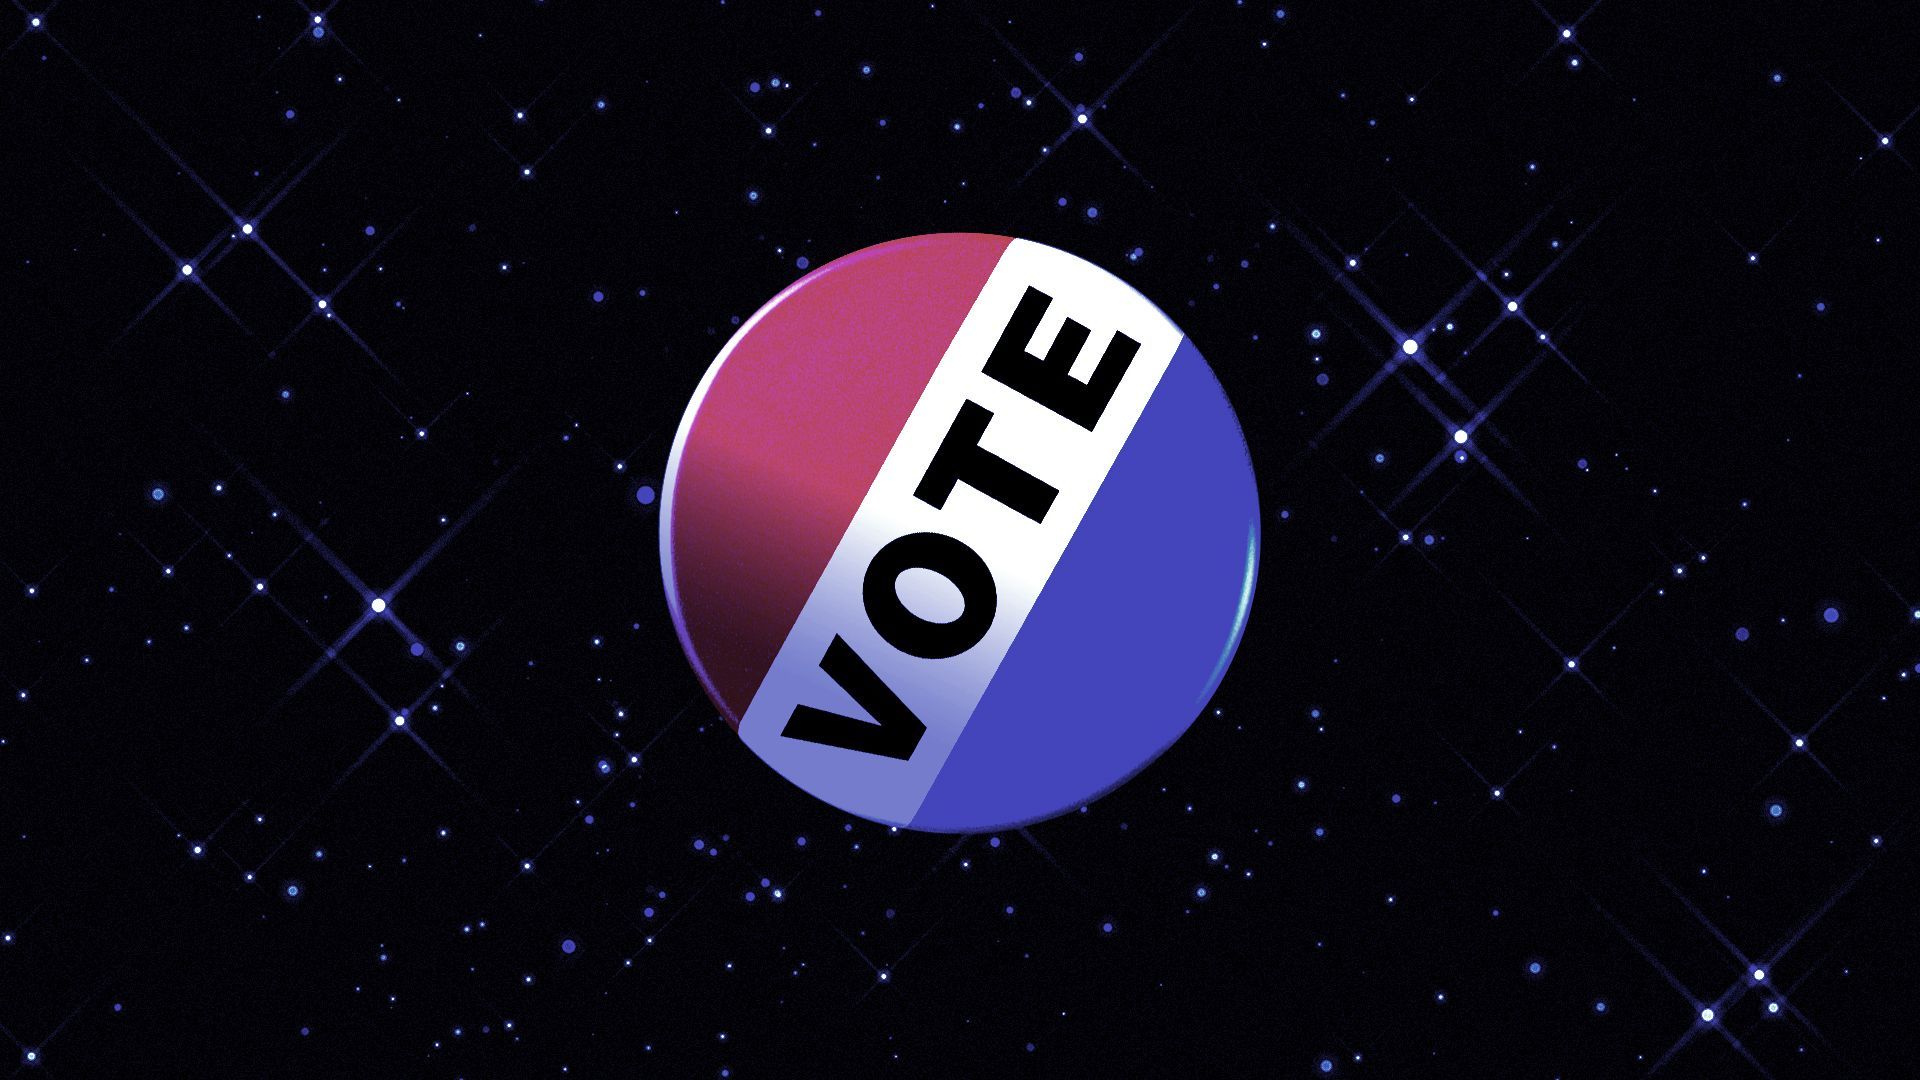 Illustration of a VOTE pin rotated and floating through space